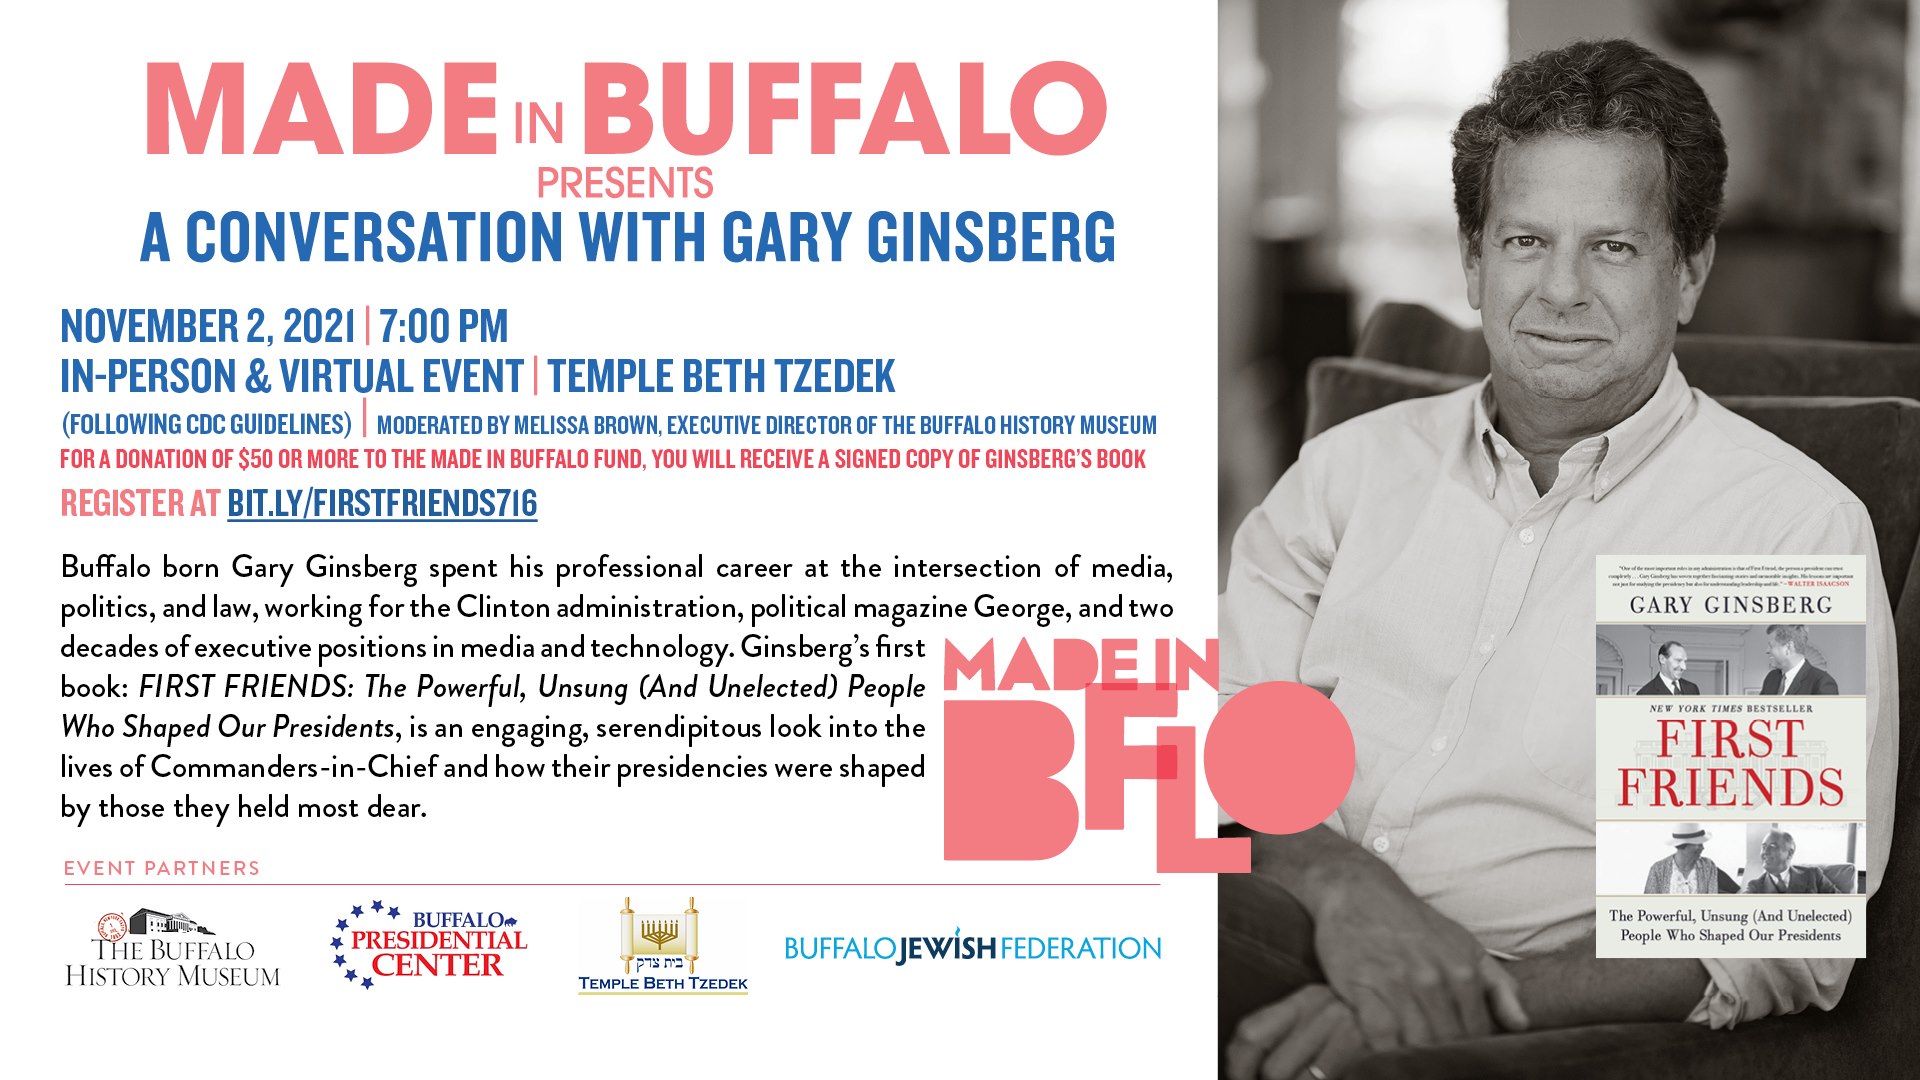 Advertising graphic for a conversation with Gary Ginsberg made in buffalo